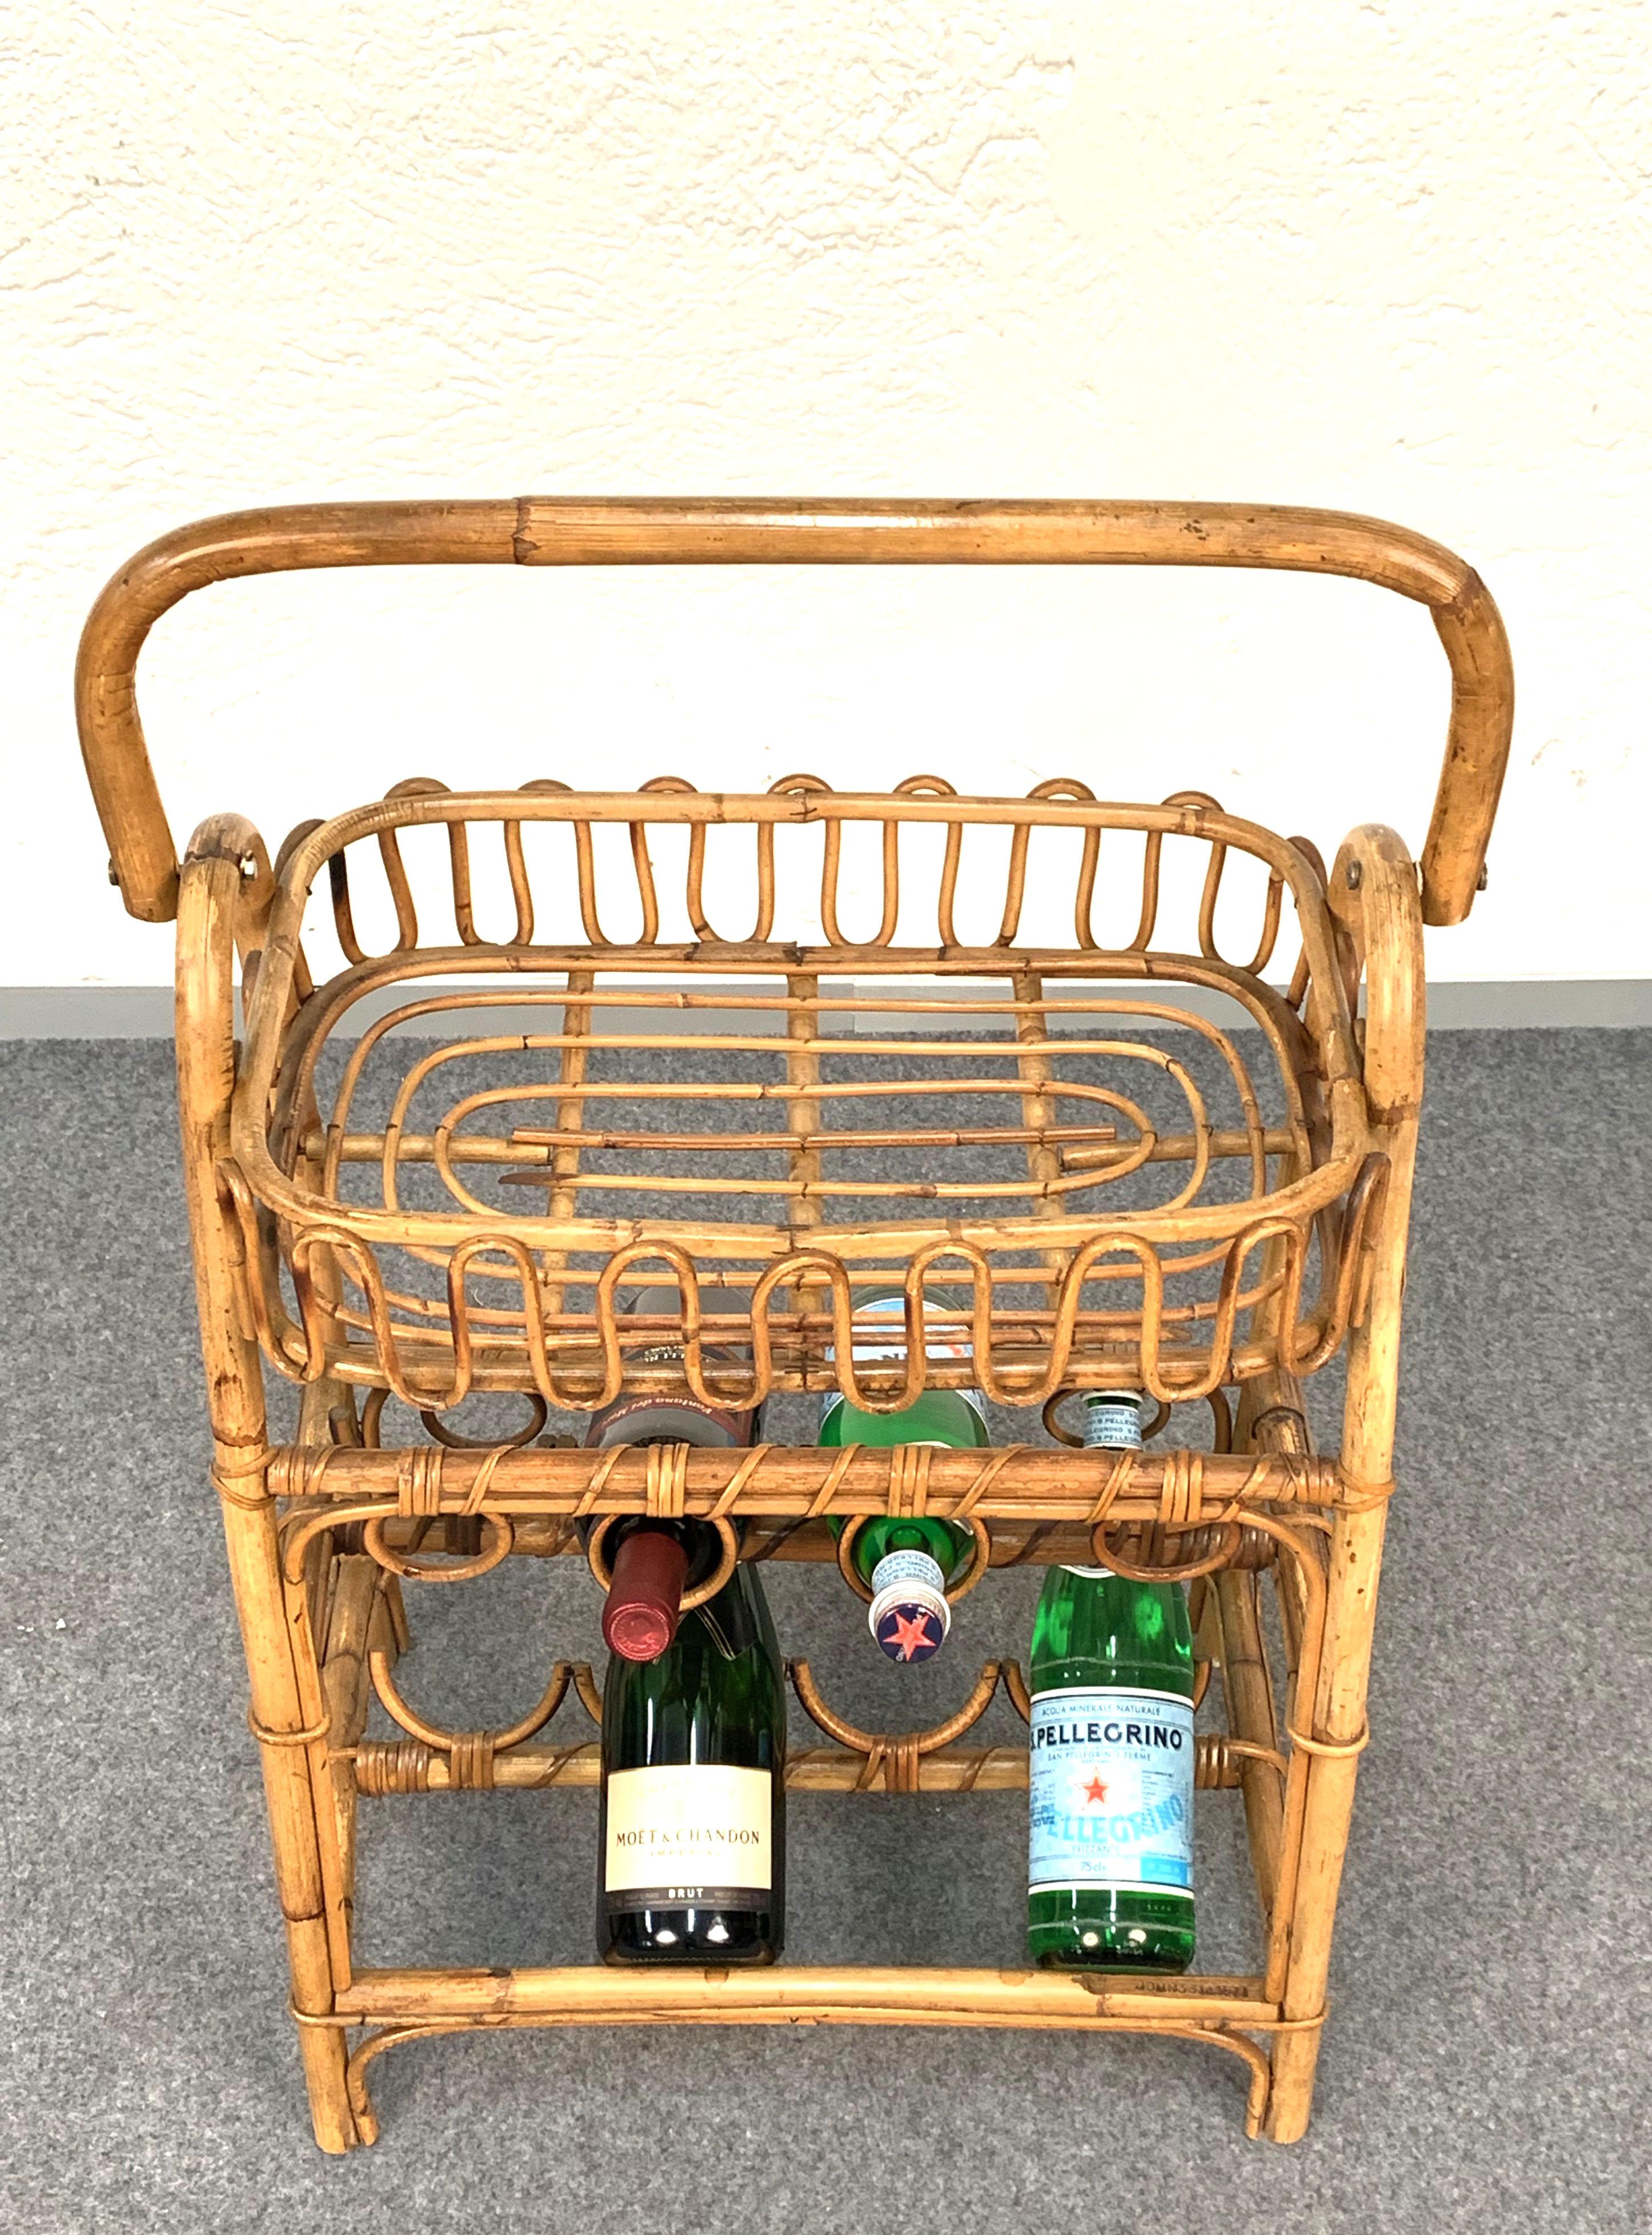 Midcentury Bamboo and Rattan Service Side Table with Bottle Holder, 1960 For Sale 3